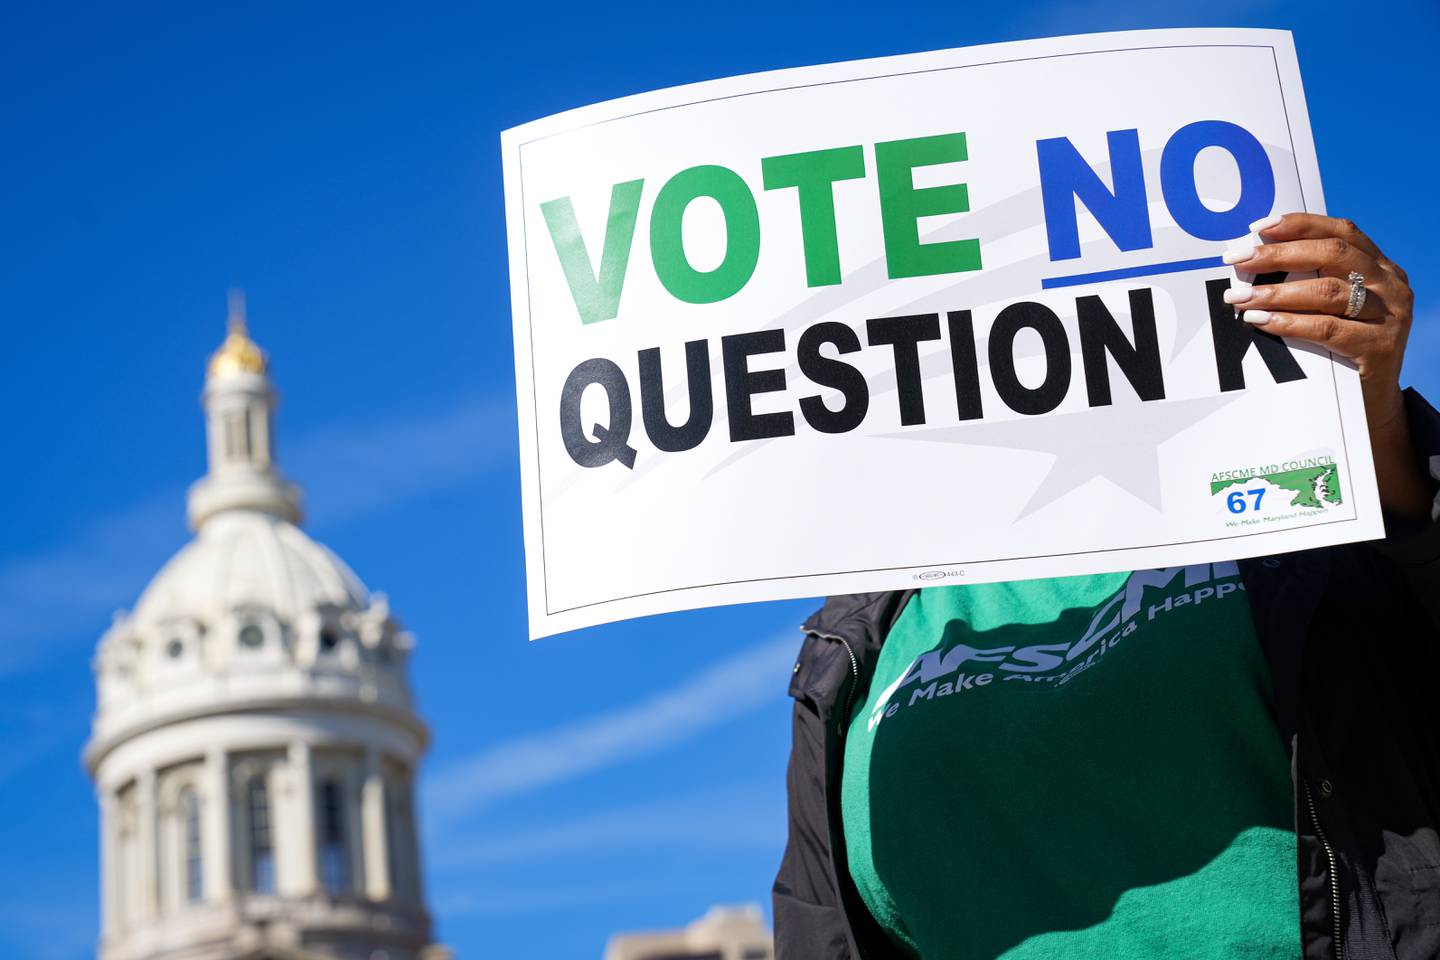 A member of AFSCME Council 67 holds up a sign encouraging Baltimore voters to vote no on Question K in the upcoming general election during a press conference at War Memorial Plaza on 10/6/22. The question would determine whether or not term limits are imposed on a number of elected positions in the city. (Ulysses Muñoz/The Baltimore Banner)